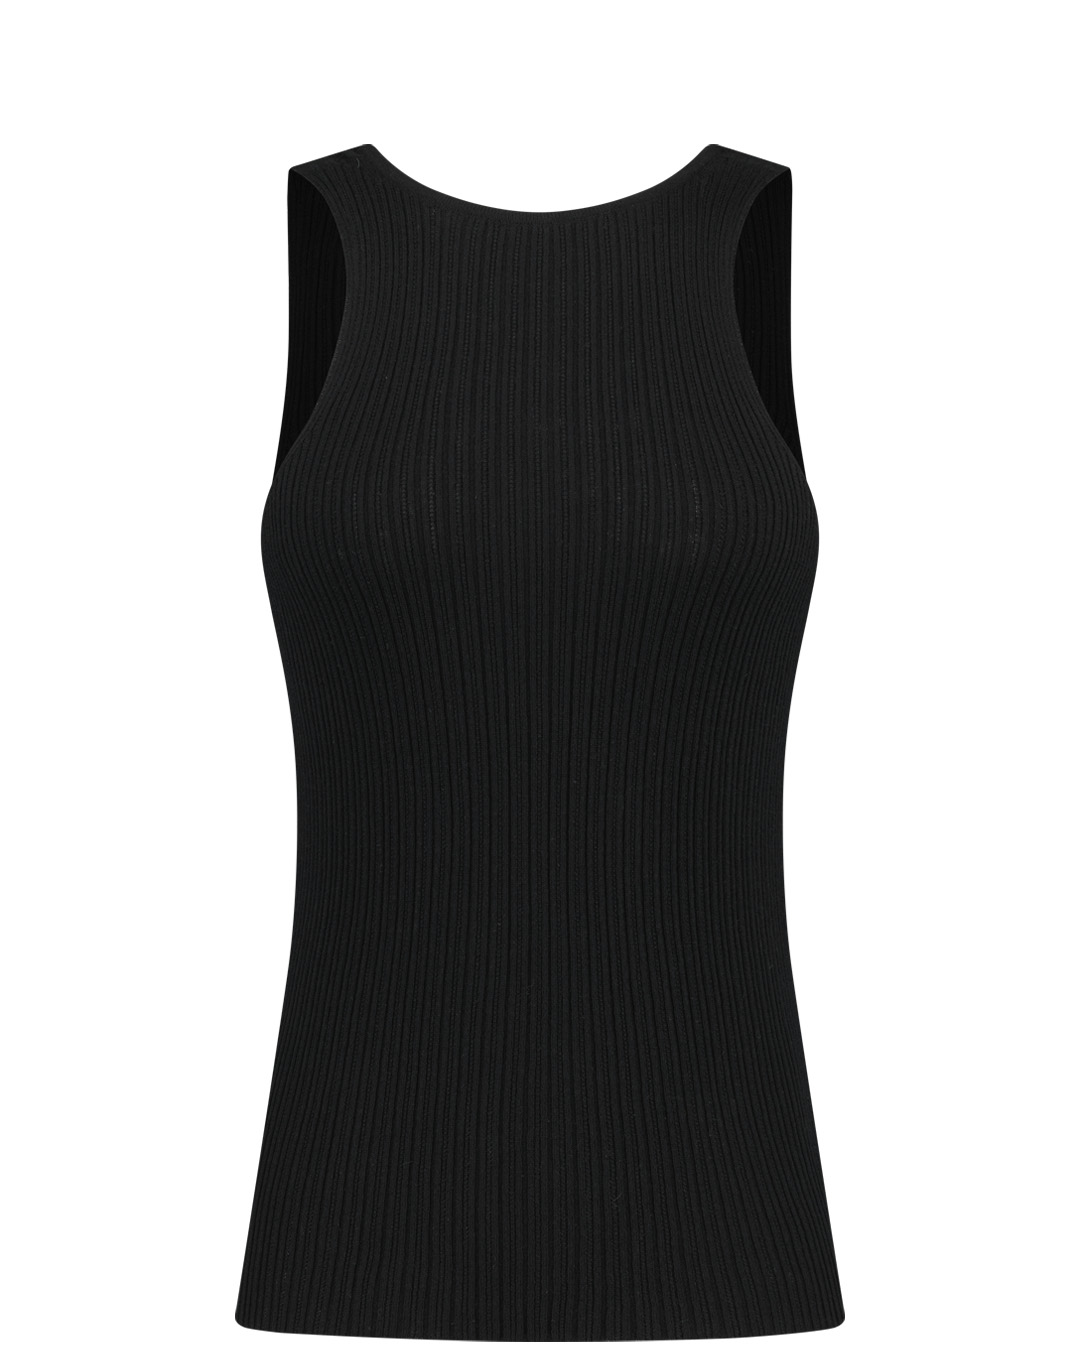 RIBBED TANK TOP IN COTTON / BLACK